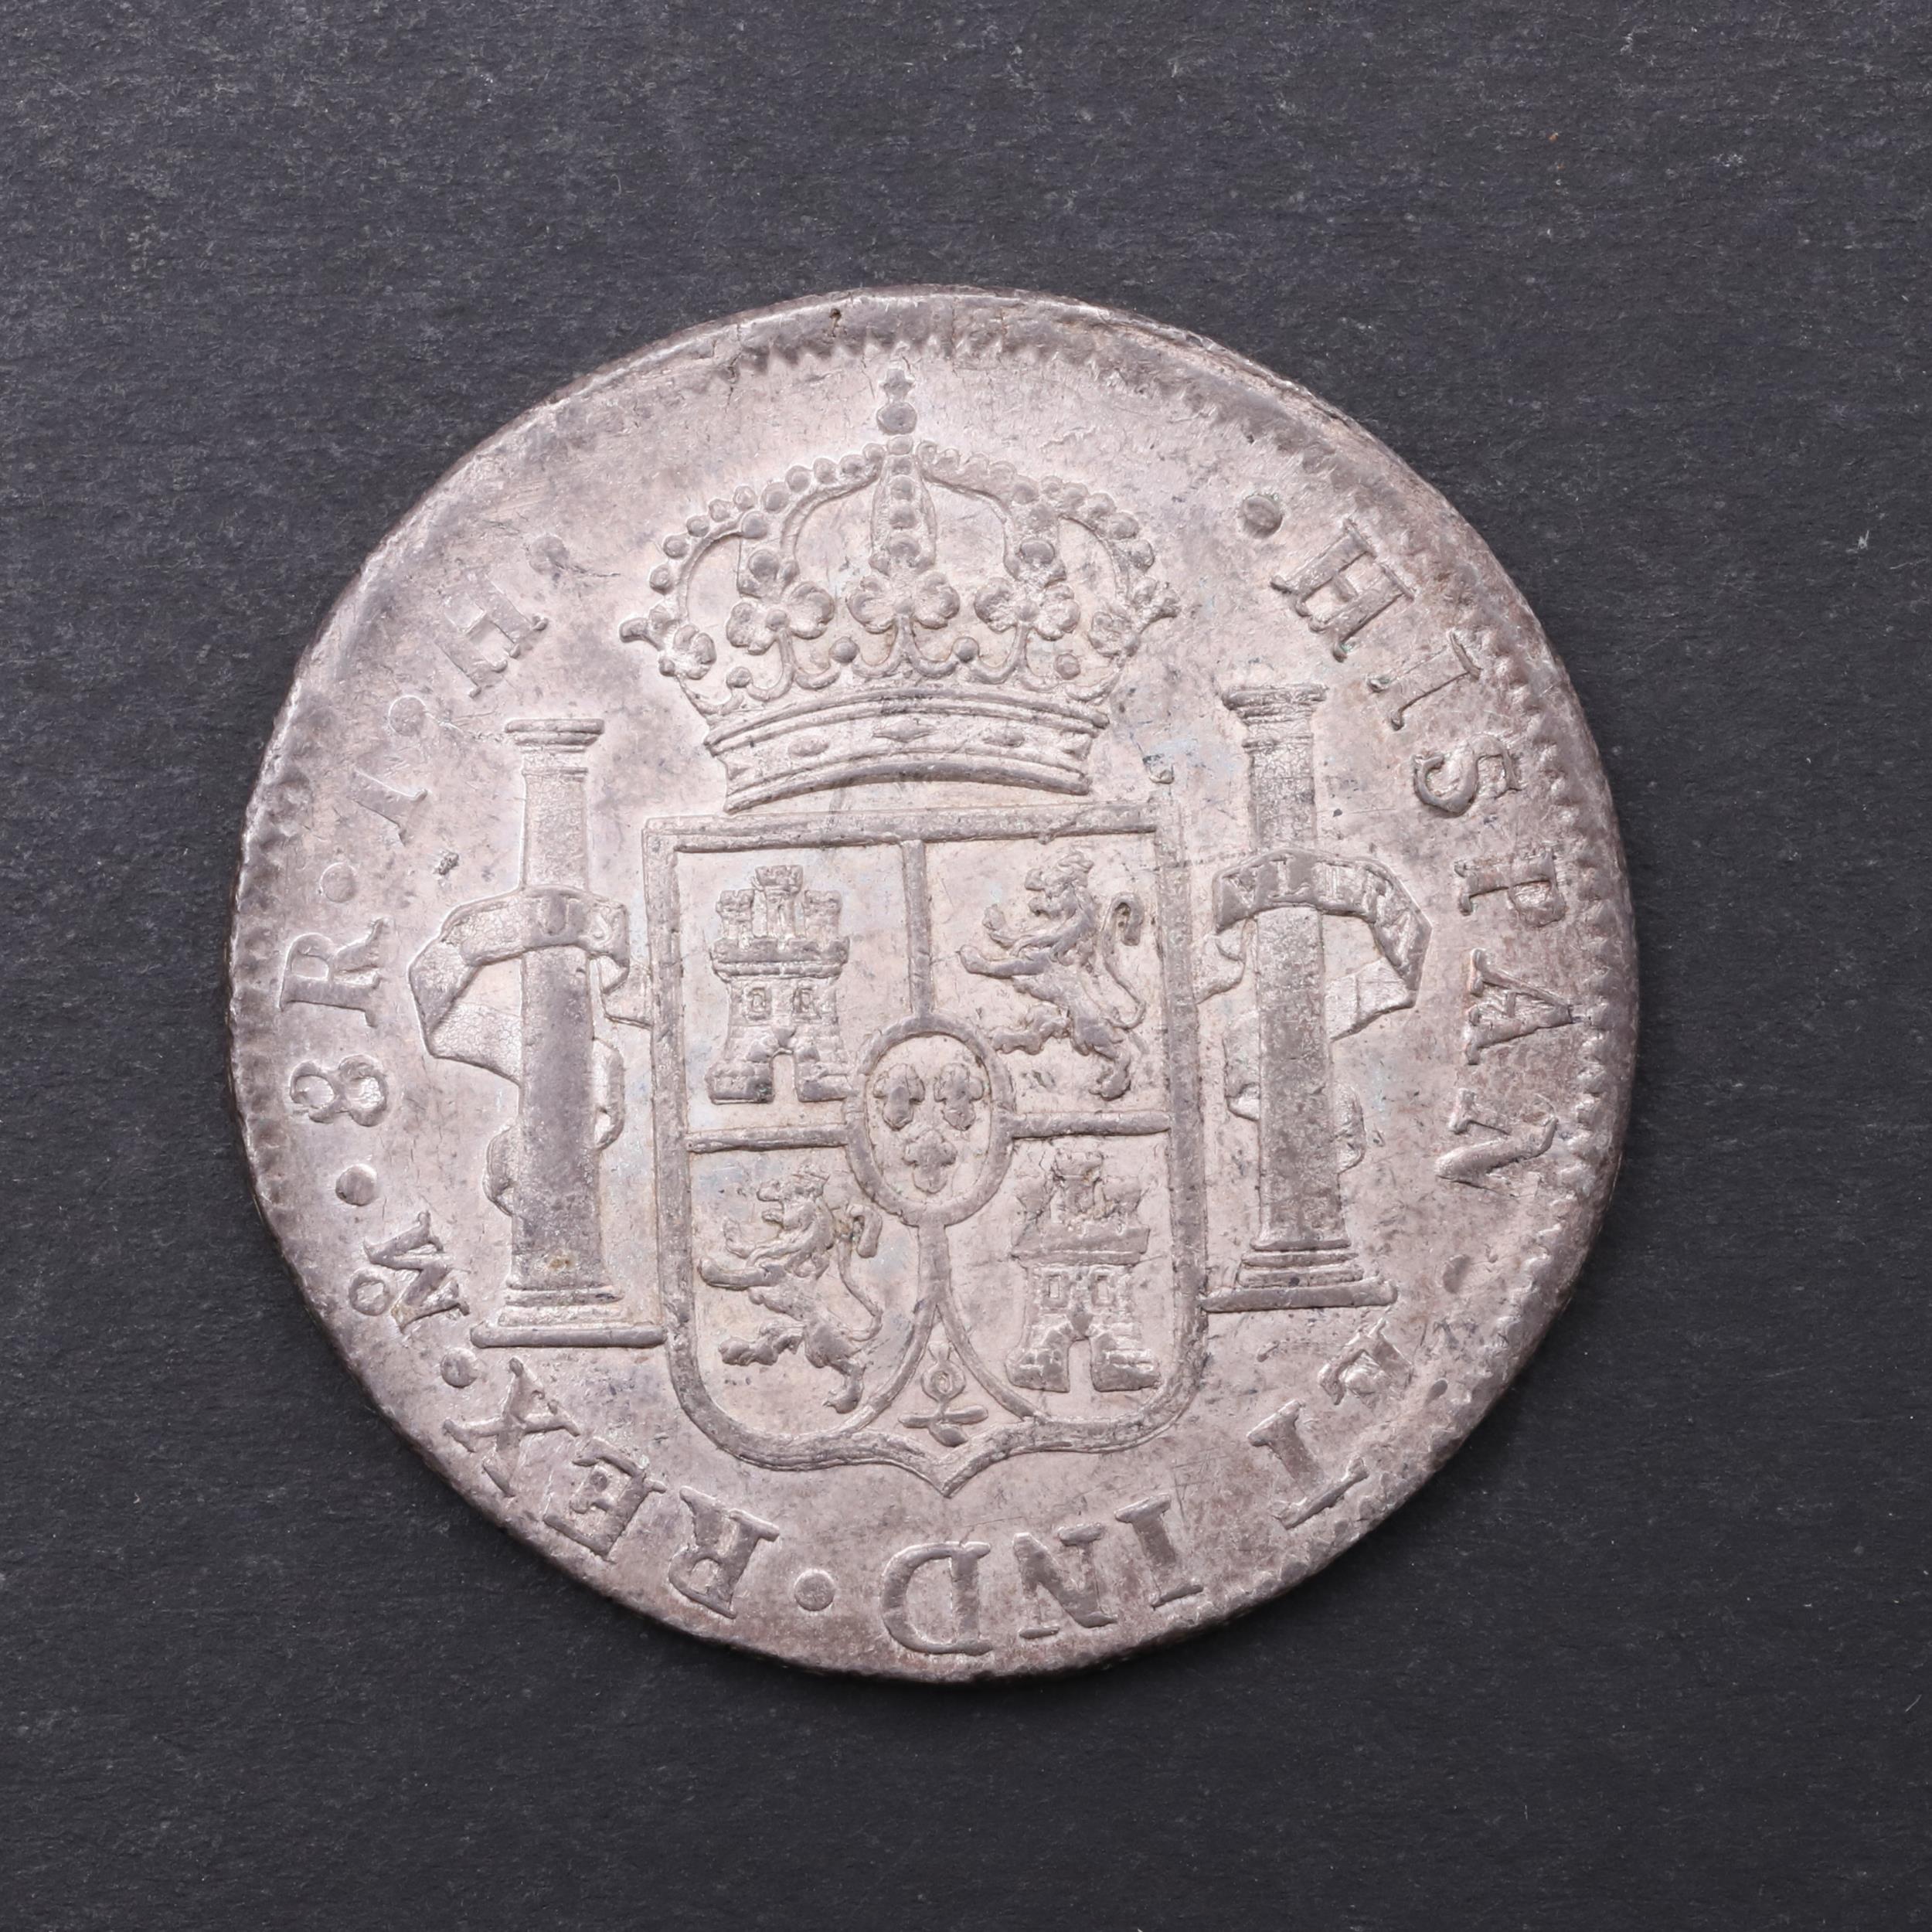 A CHARLES III OF SPAIN EIGHT REALS, 1808. - Image 2 of 3